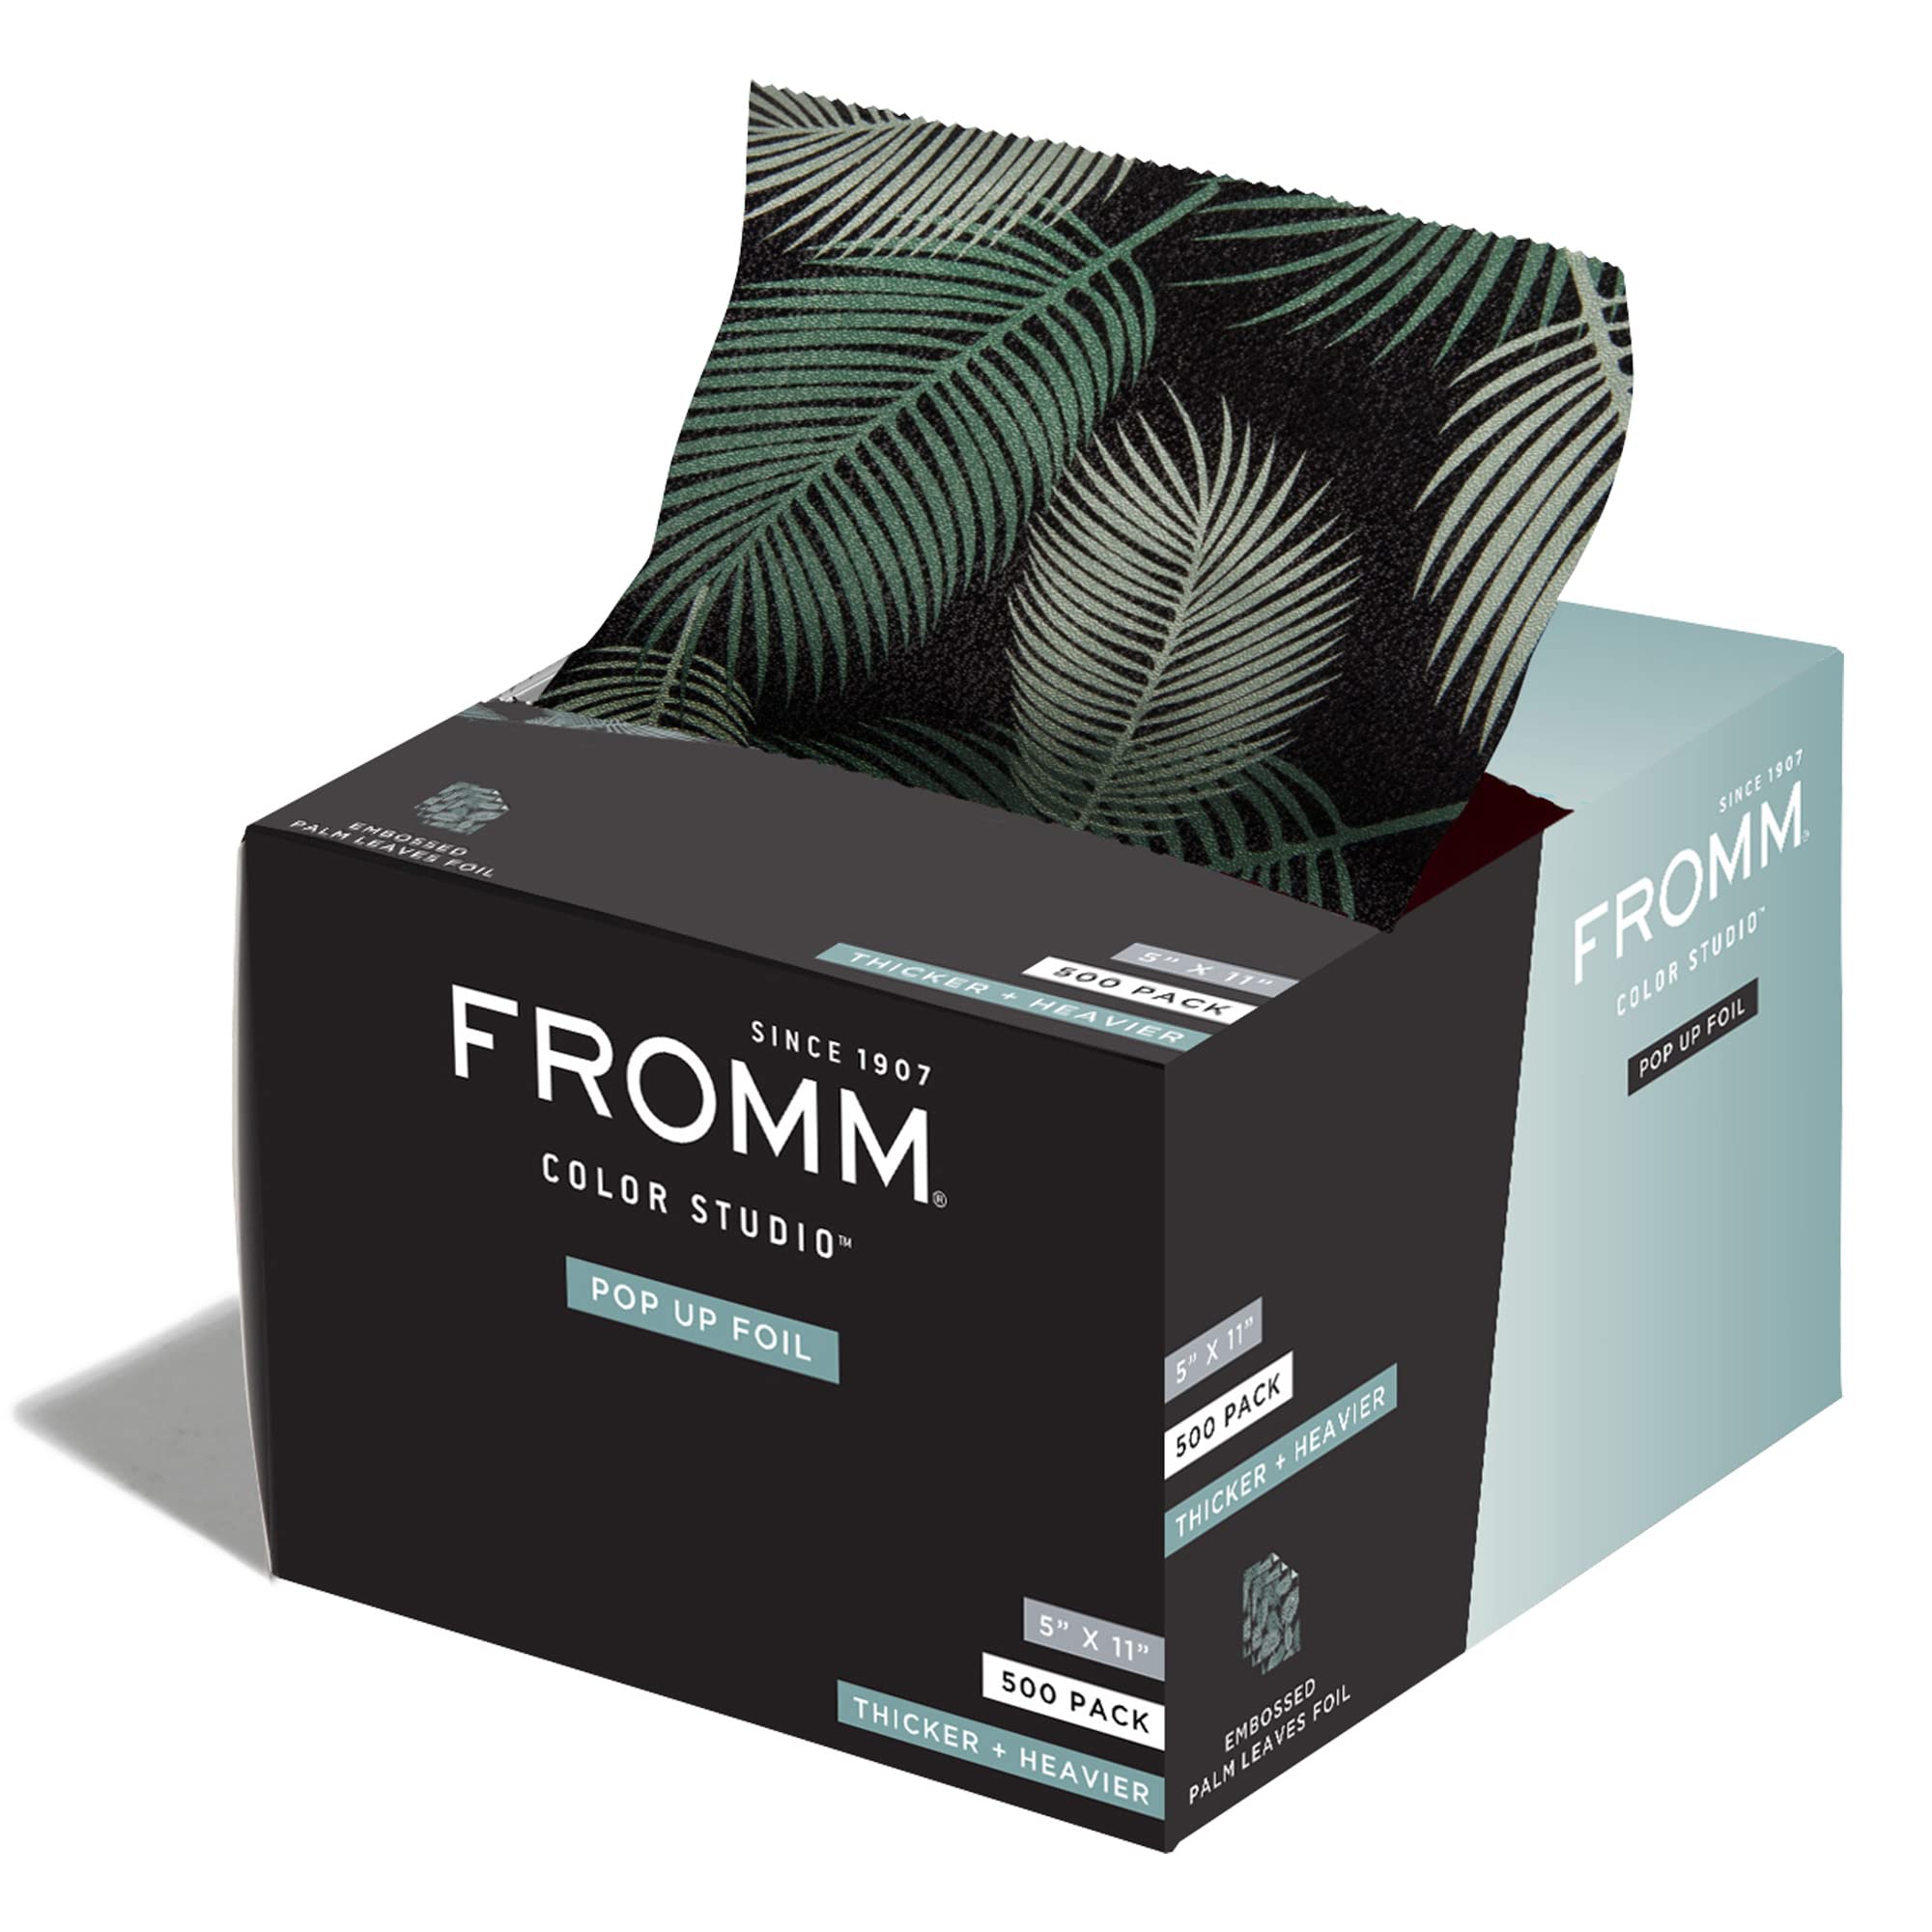 Fromm Color Studio Pop Up Hair Foil in Palms Leaves Pattern 5 x 11 Embossed  Aluminum Foil Sheets Hair Foils For Highlighting and Coloring - 500 Foil  Sheets